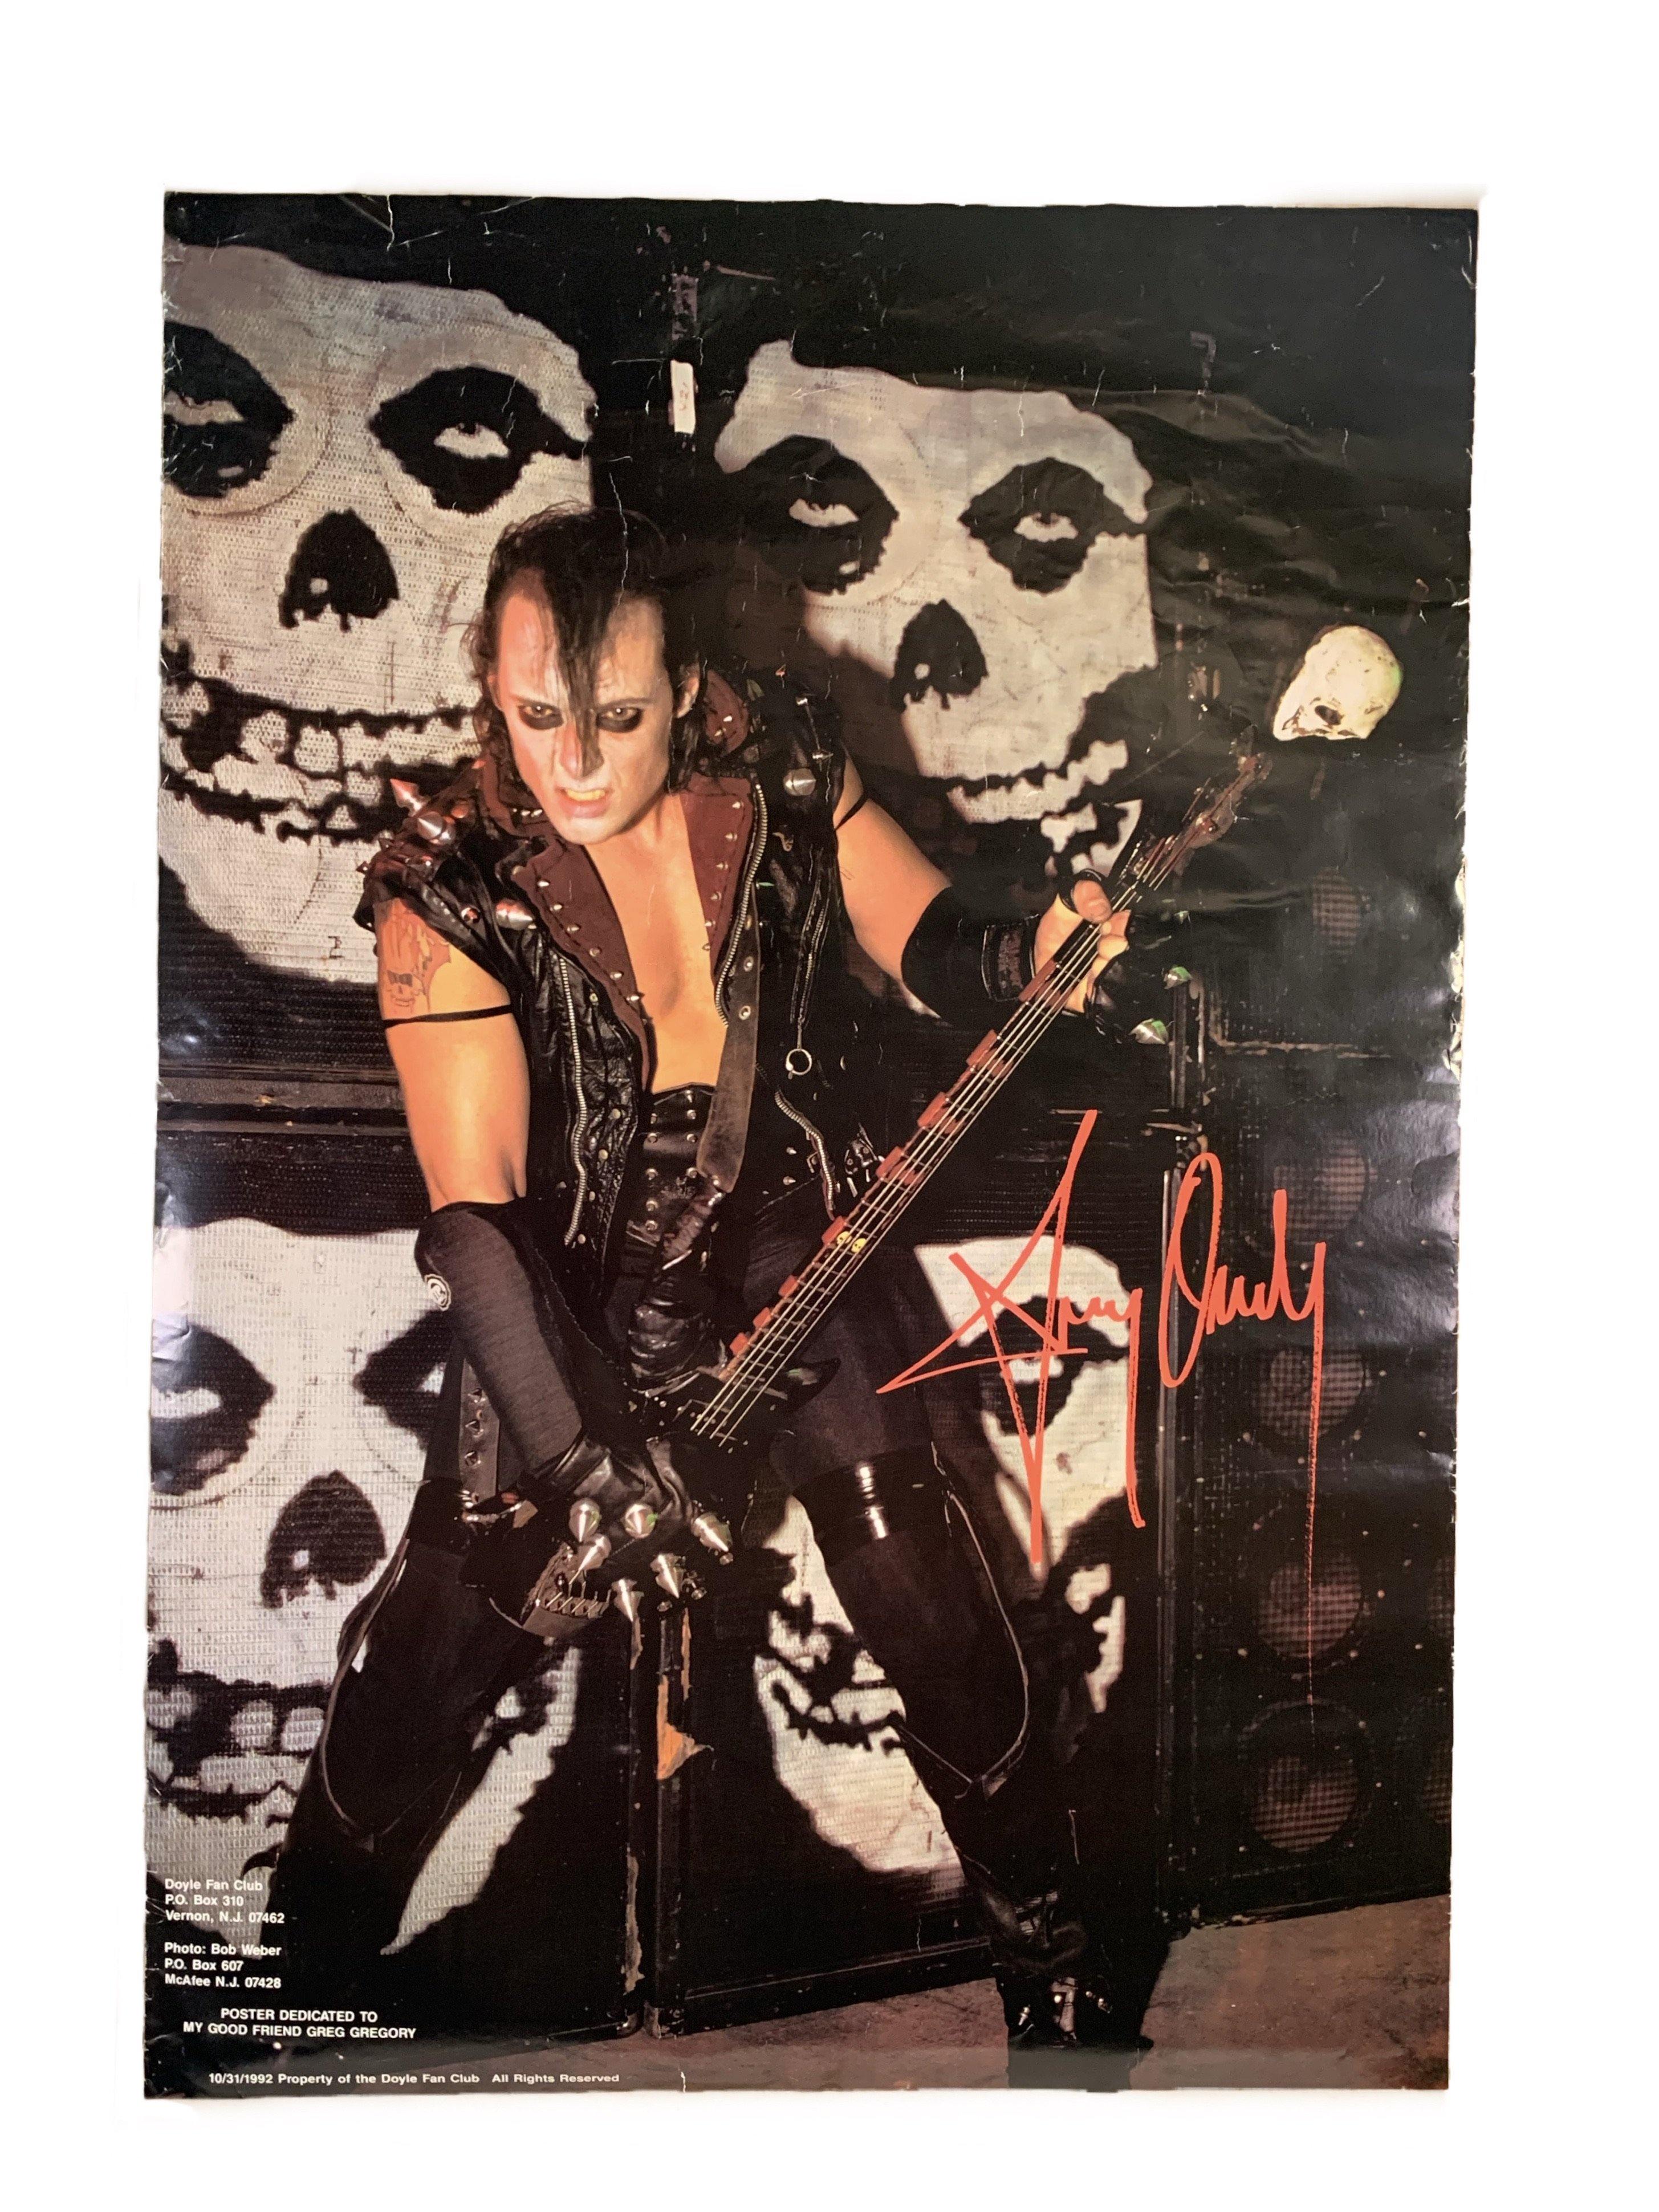 Vintage Doyle Fan Club “Jerry Only” Poster